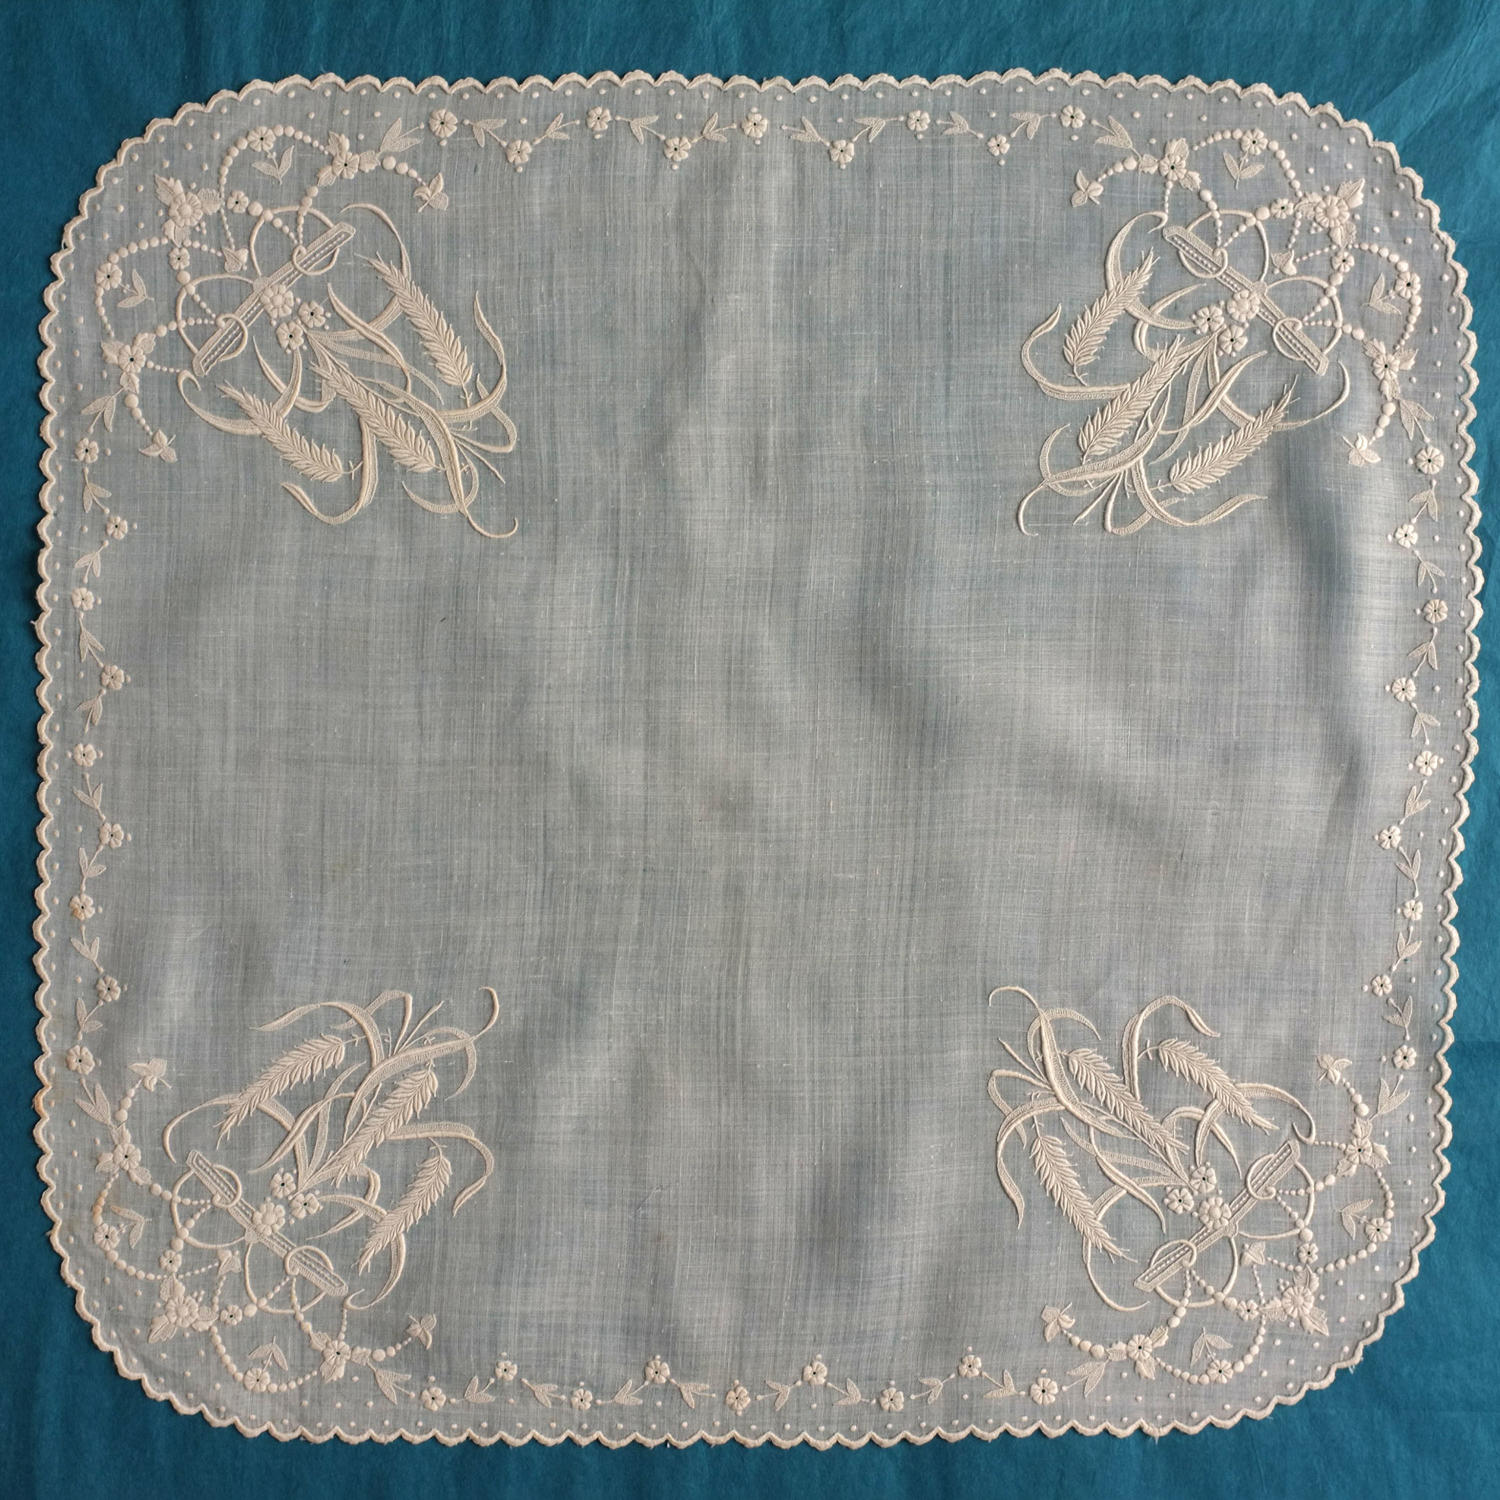 19th Century Embroidered Whitework Handkerchief with Wheat Ears